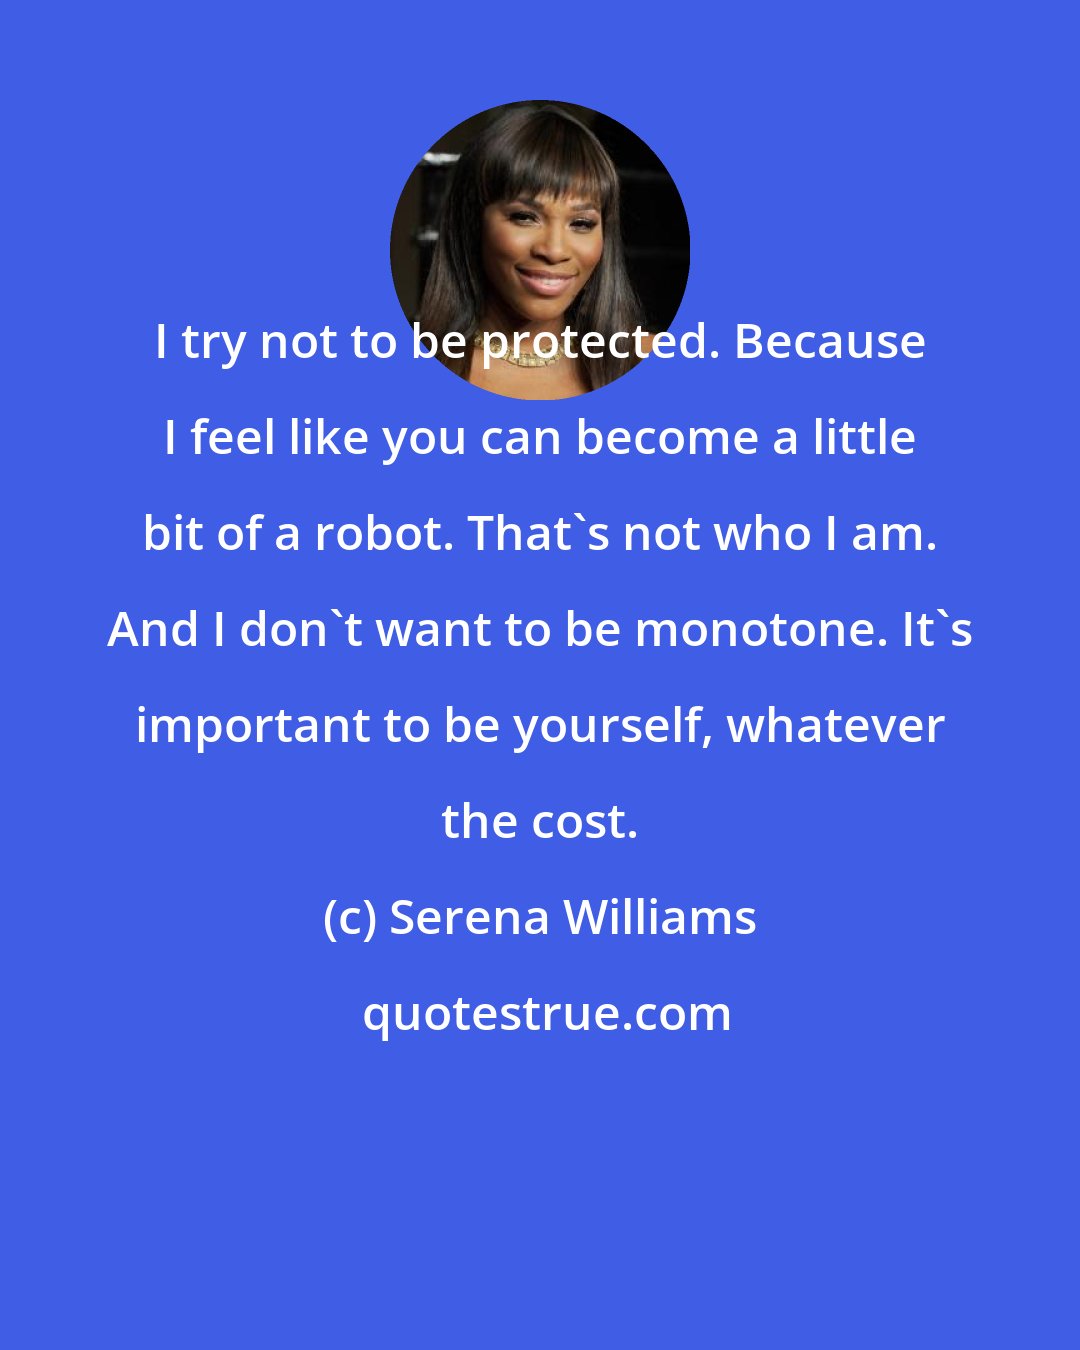 Serena Williams: I try not to be protected. Because I feel like you can become a little bit of a robot. That's not who I am. And I don't want to be monotone. It's important to be yourself, whatever the cost.